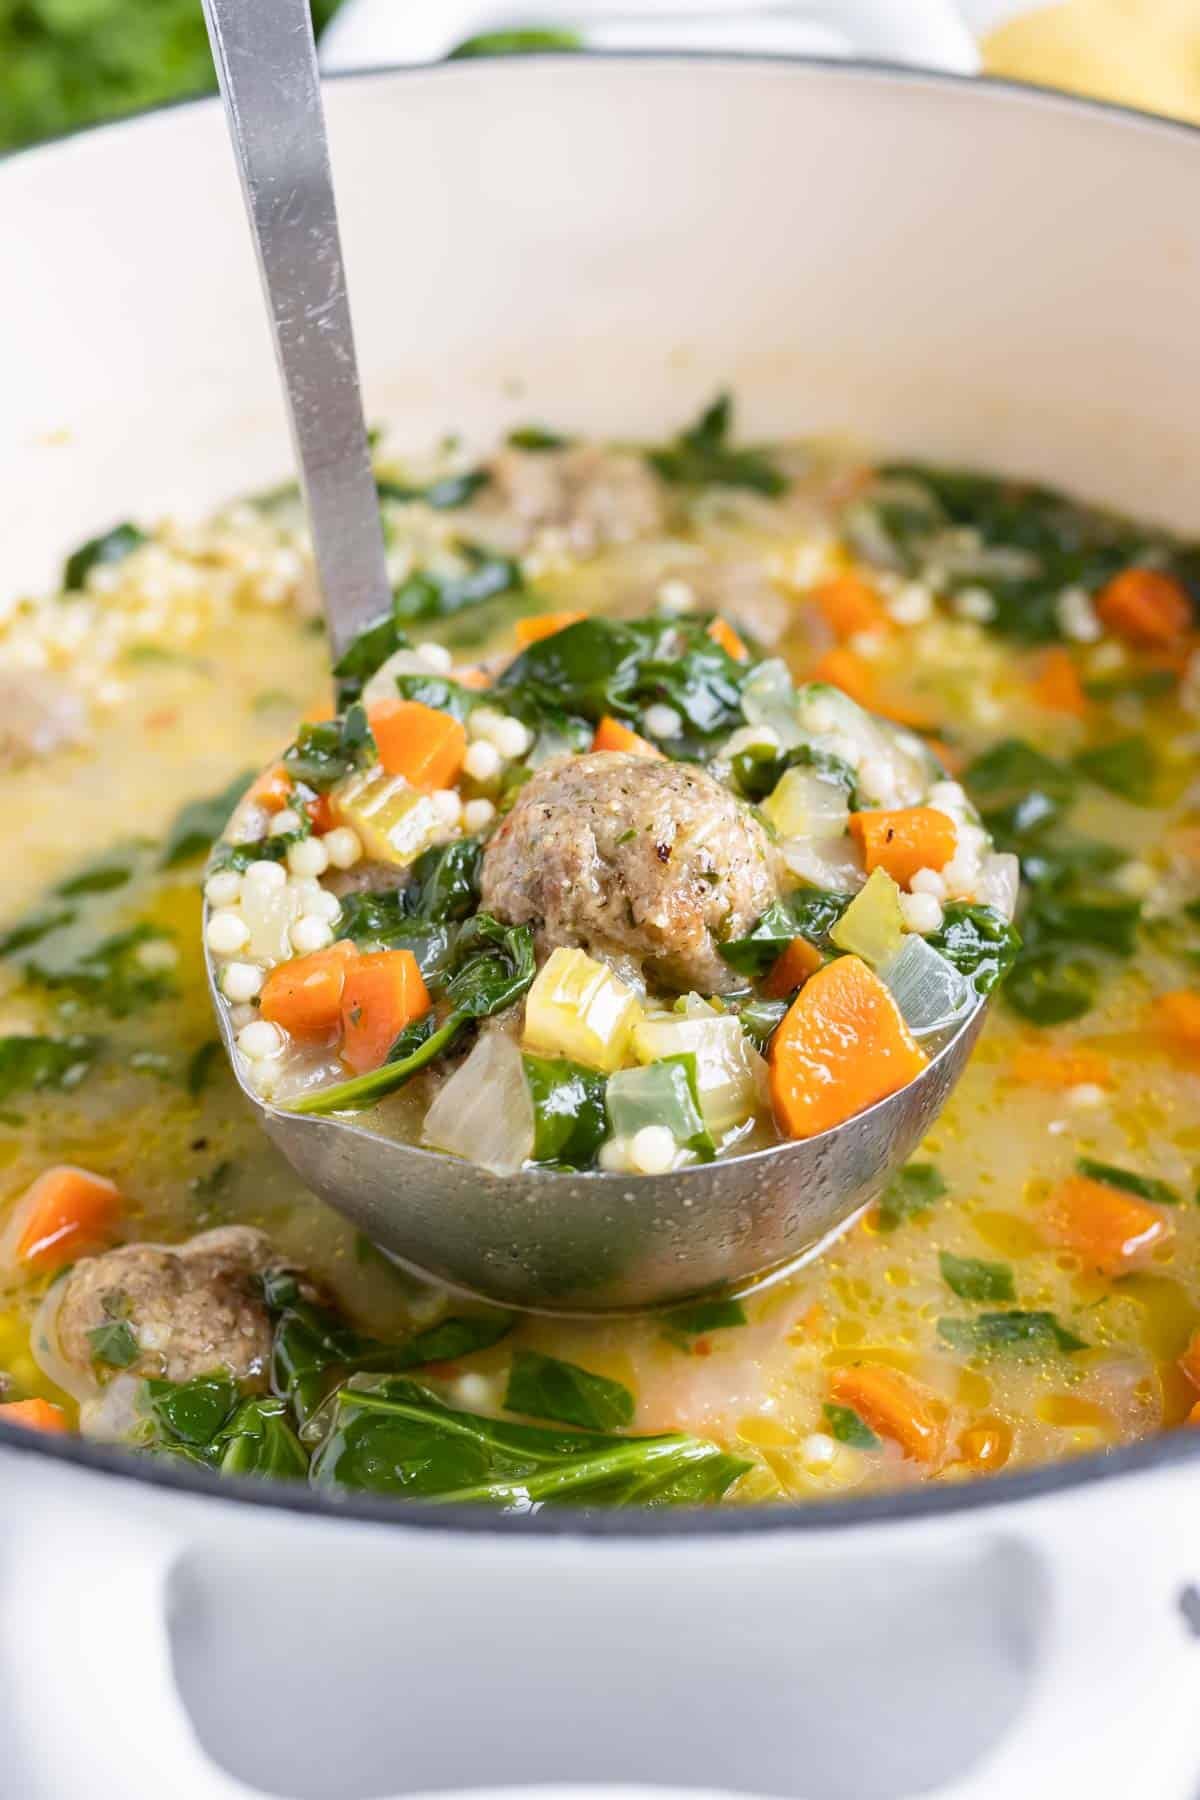 A ladle scooping up Italian wedding soup from a white Dutch oven.